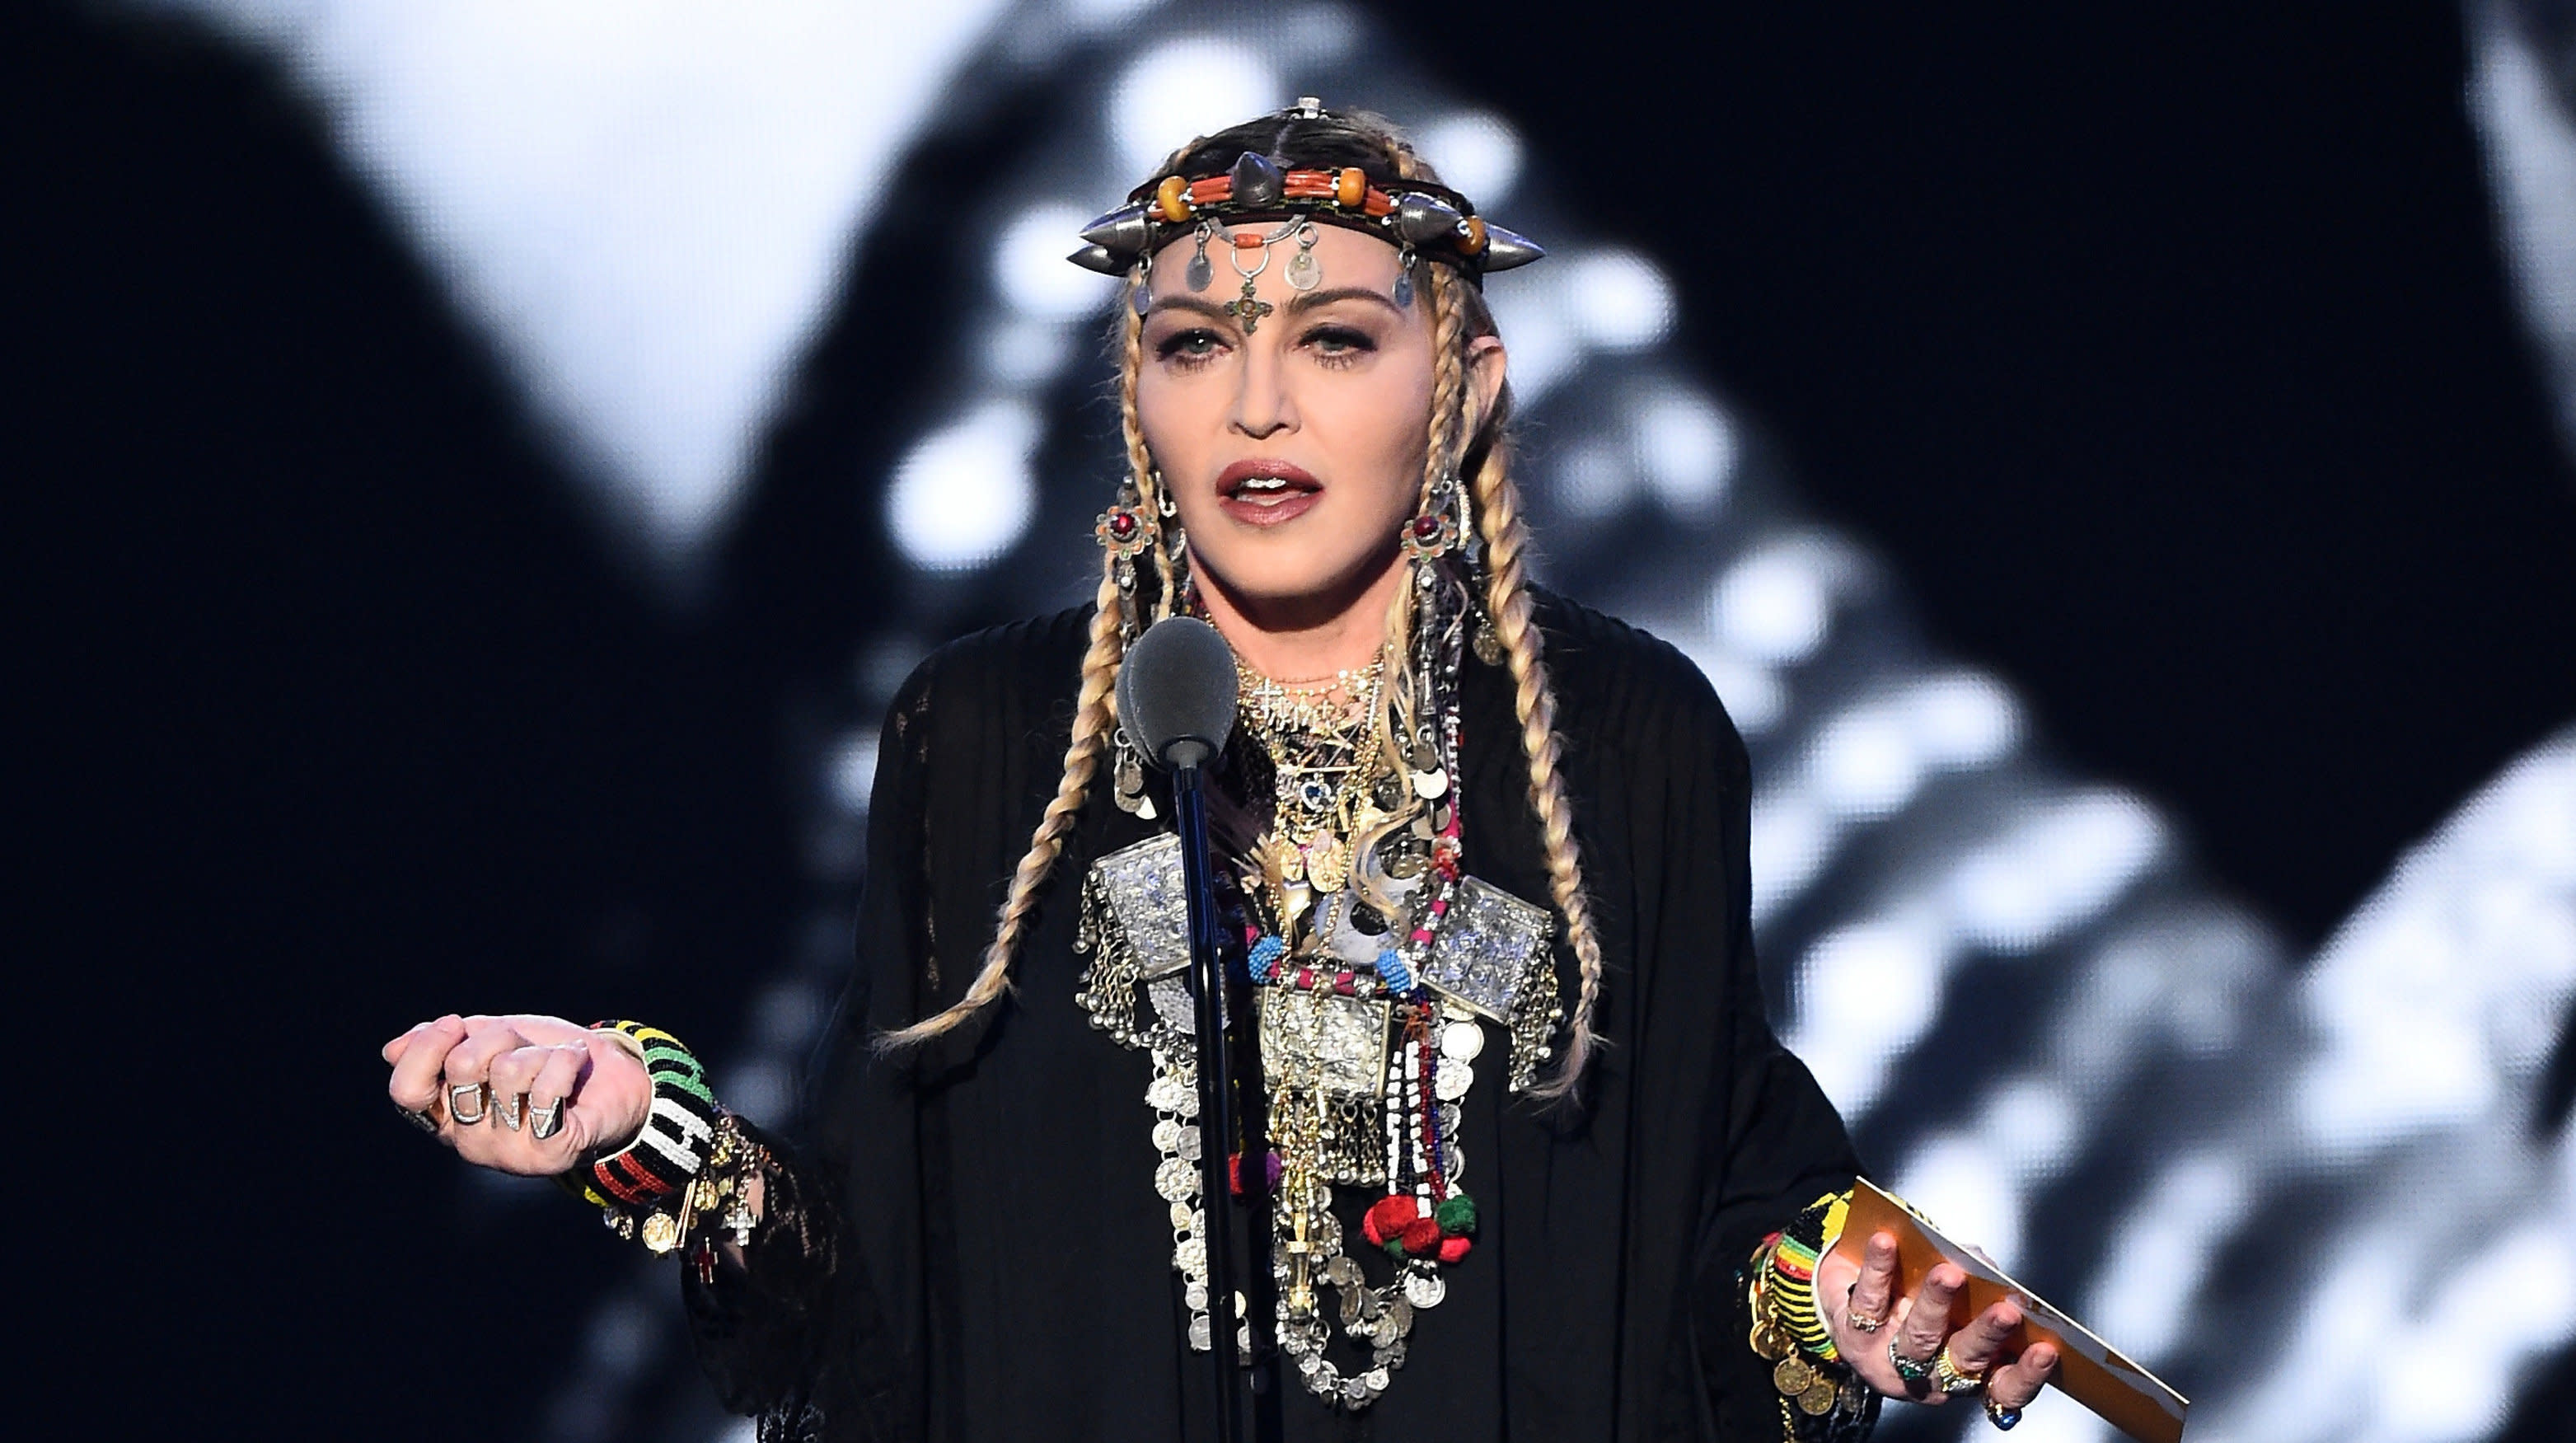 Madonna’s odd, self-absorbed VMAs Aretha Franklin tribute angers Twitter